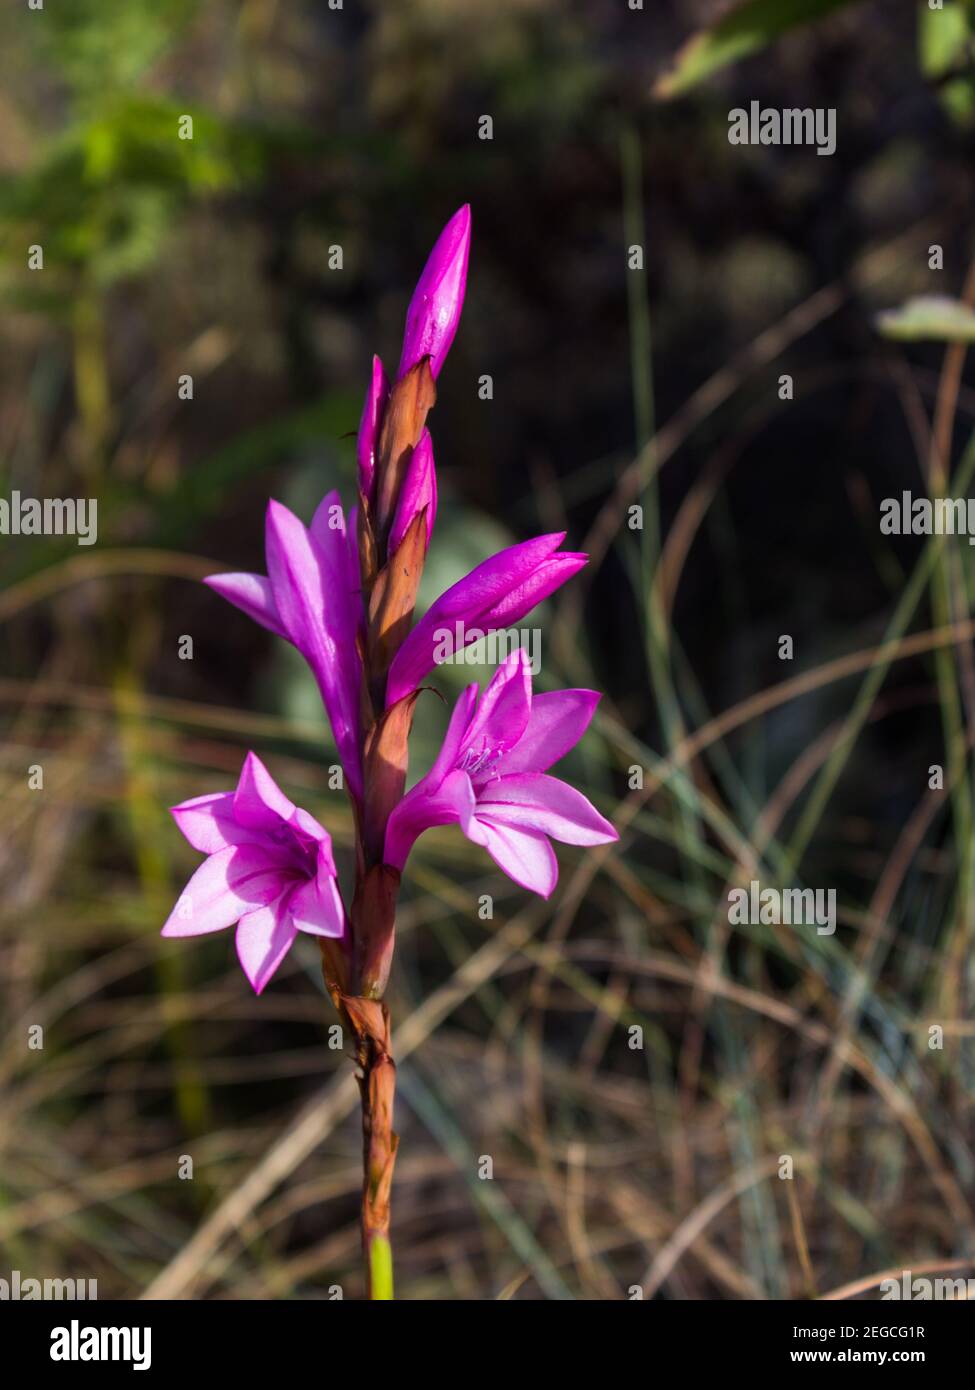 The purple Florescence of the Drakensberg Watsonia, Watsonia Lepida, in the Afromontane Grasslands of the Central Drakensberg Mountains, South Africa. Stock Photo